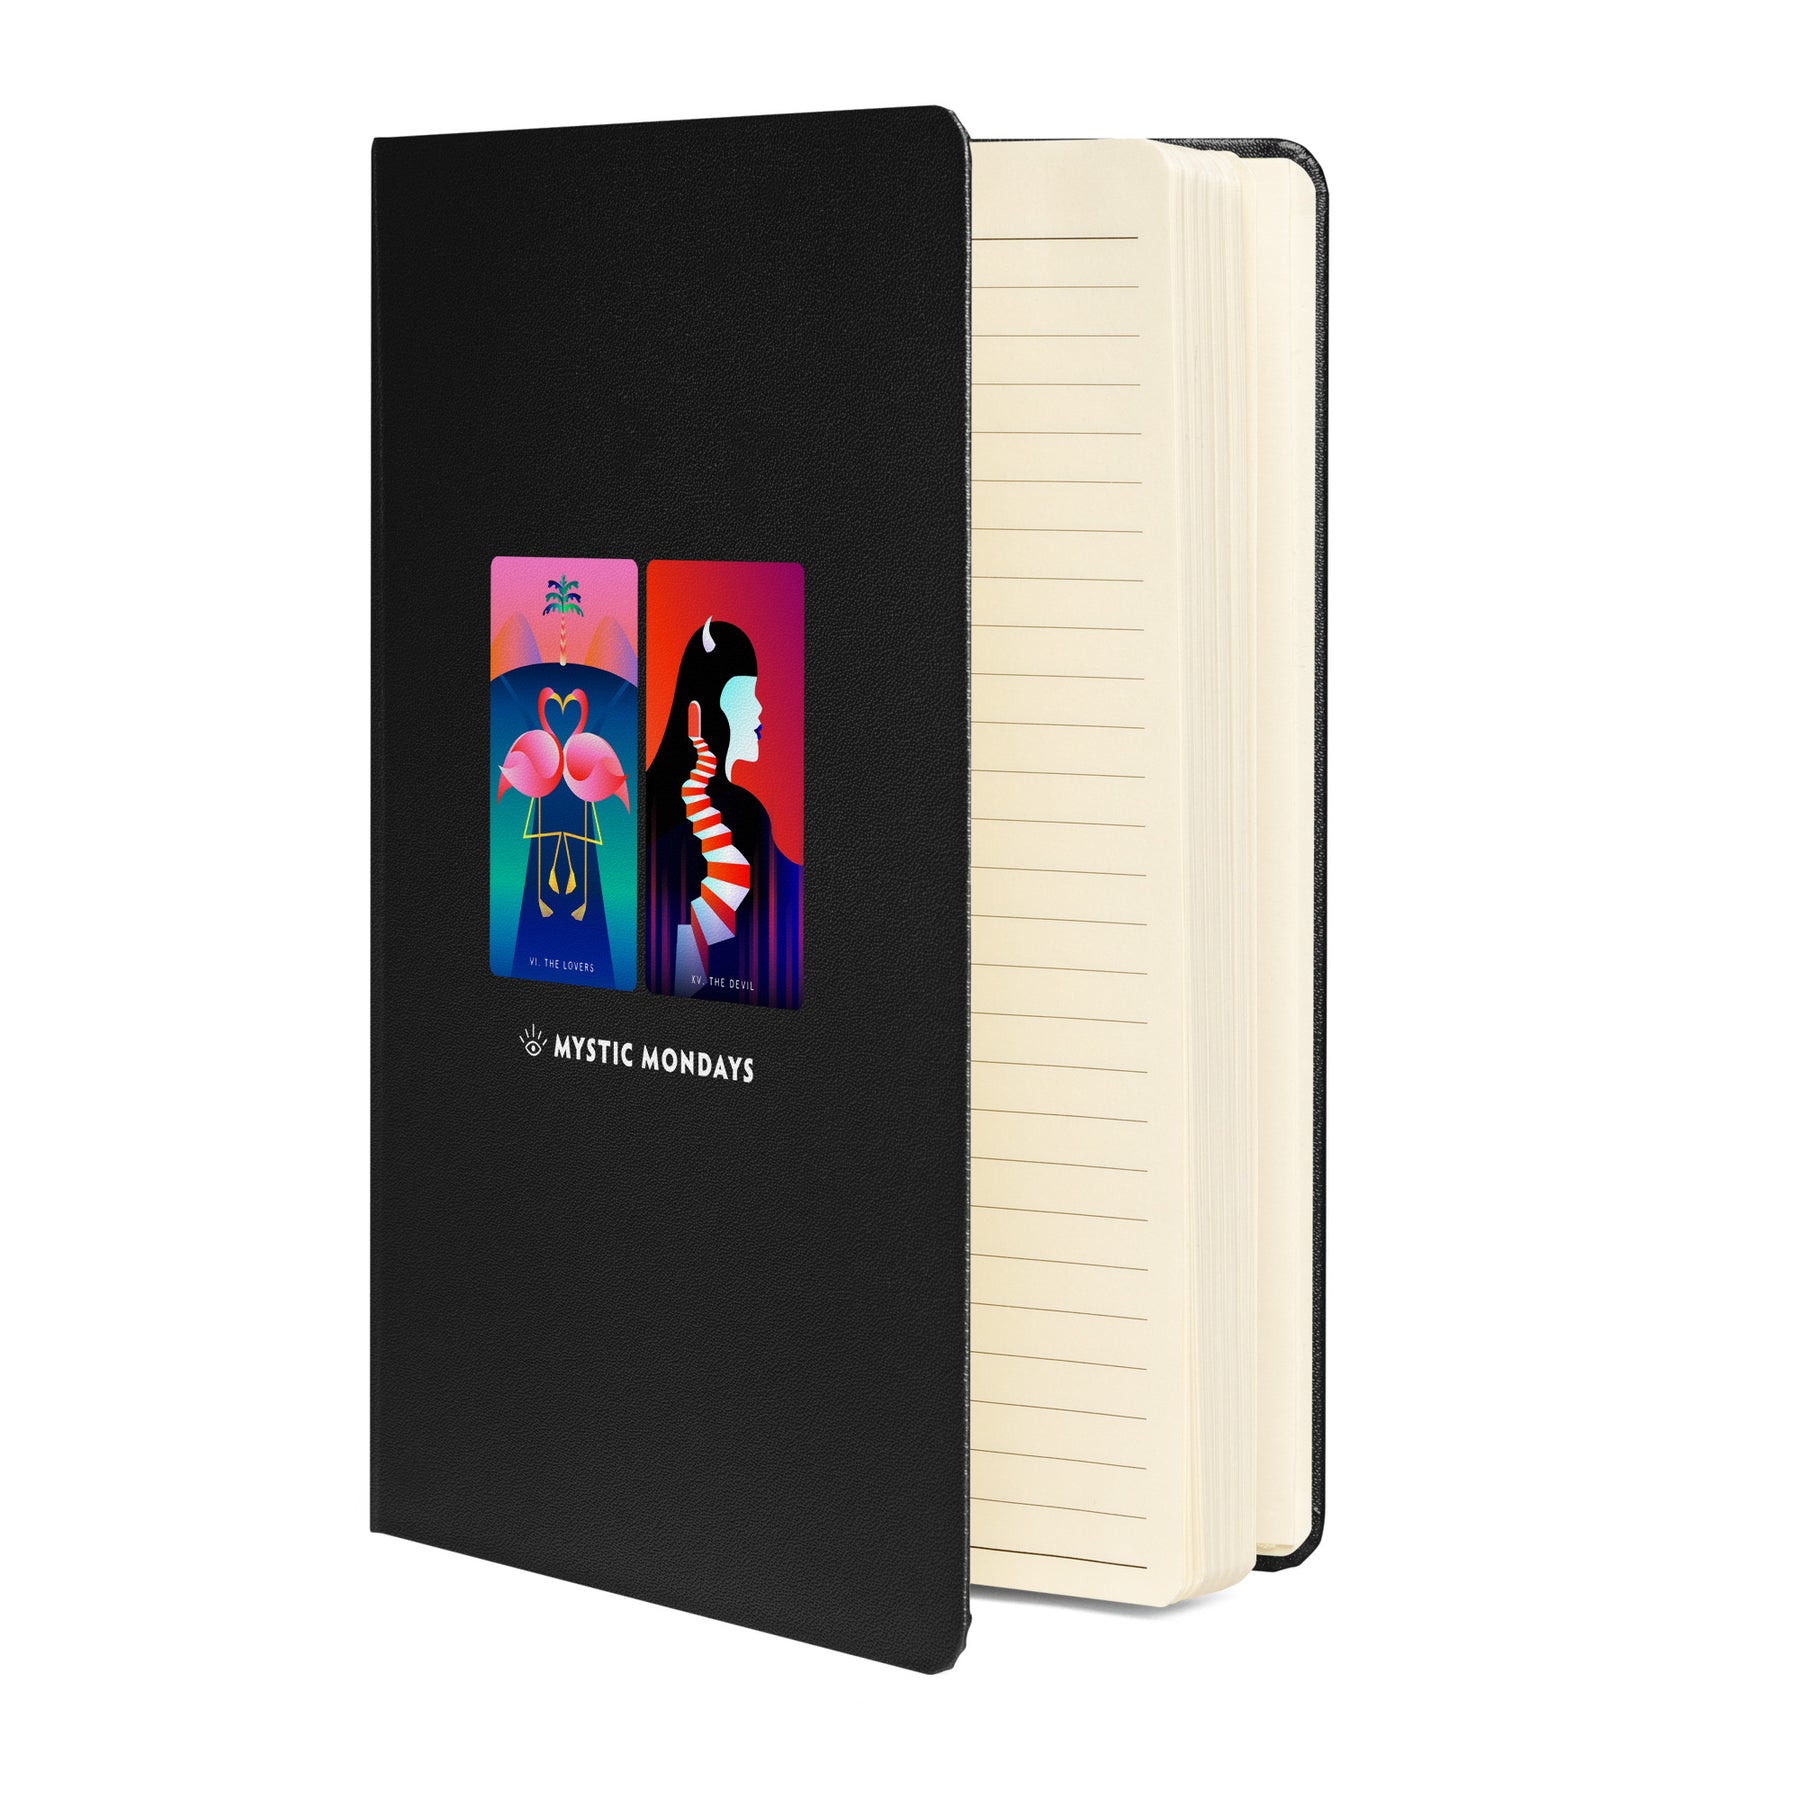 The Lovers and The Devil Hardcover Journal